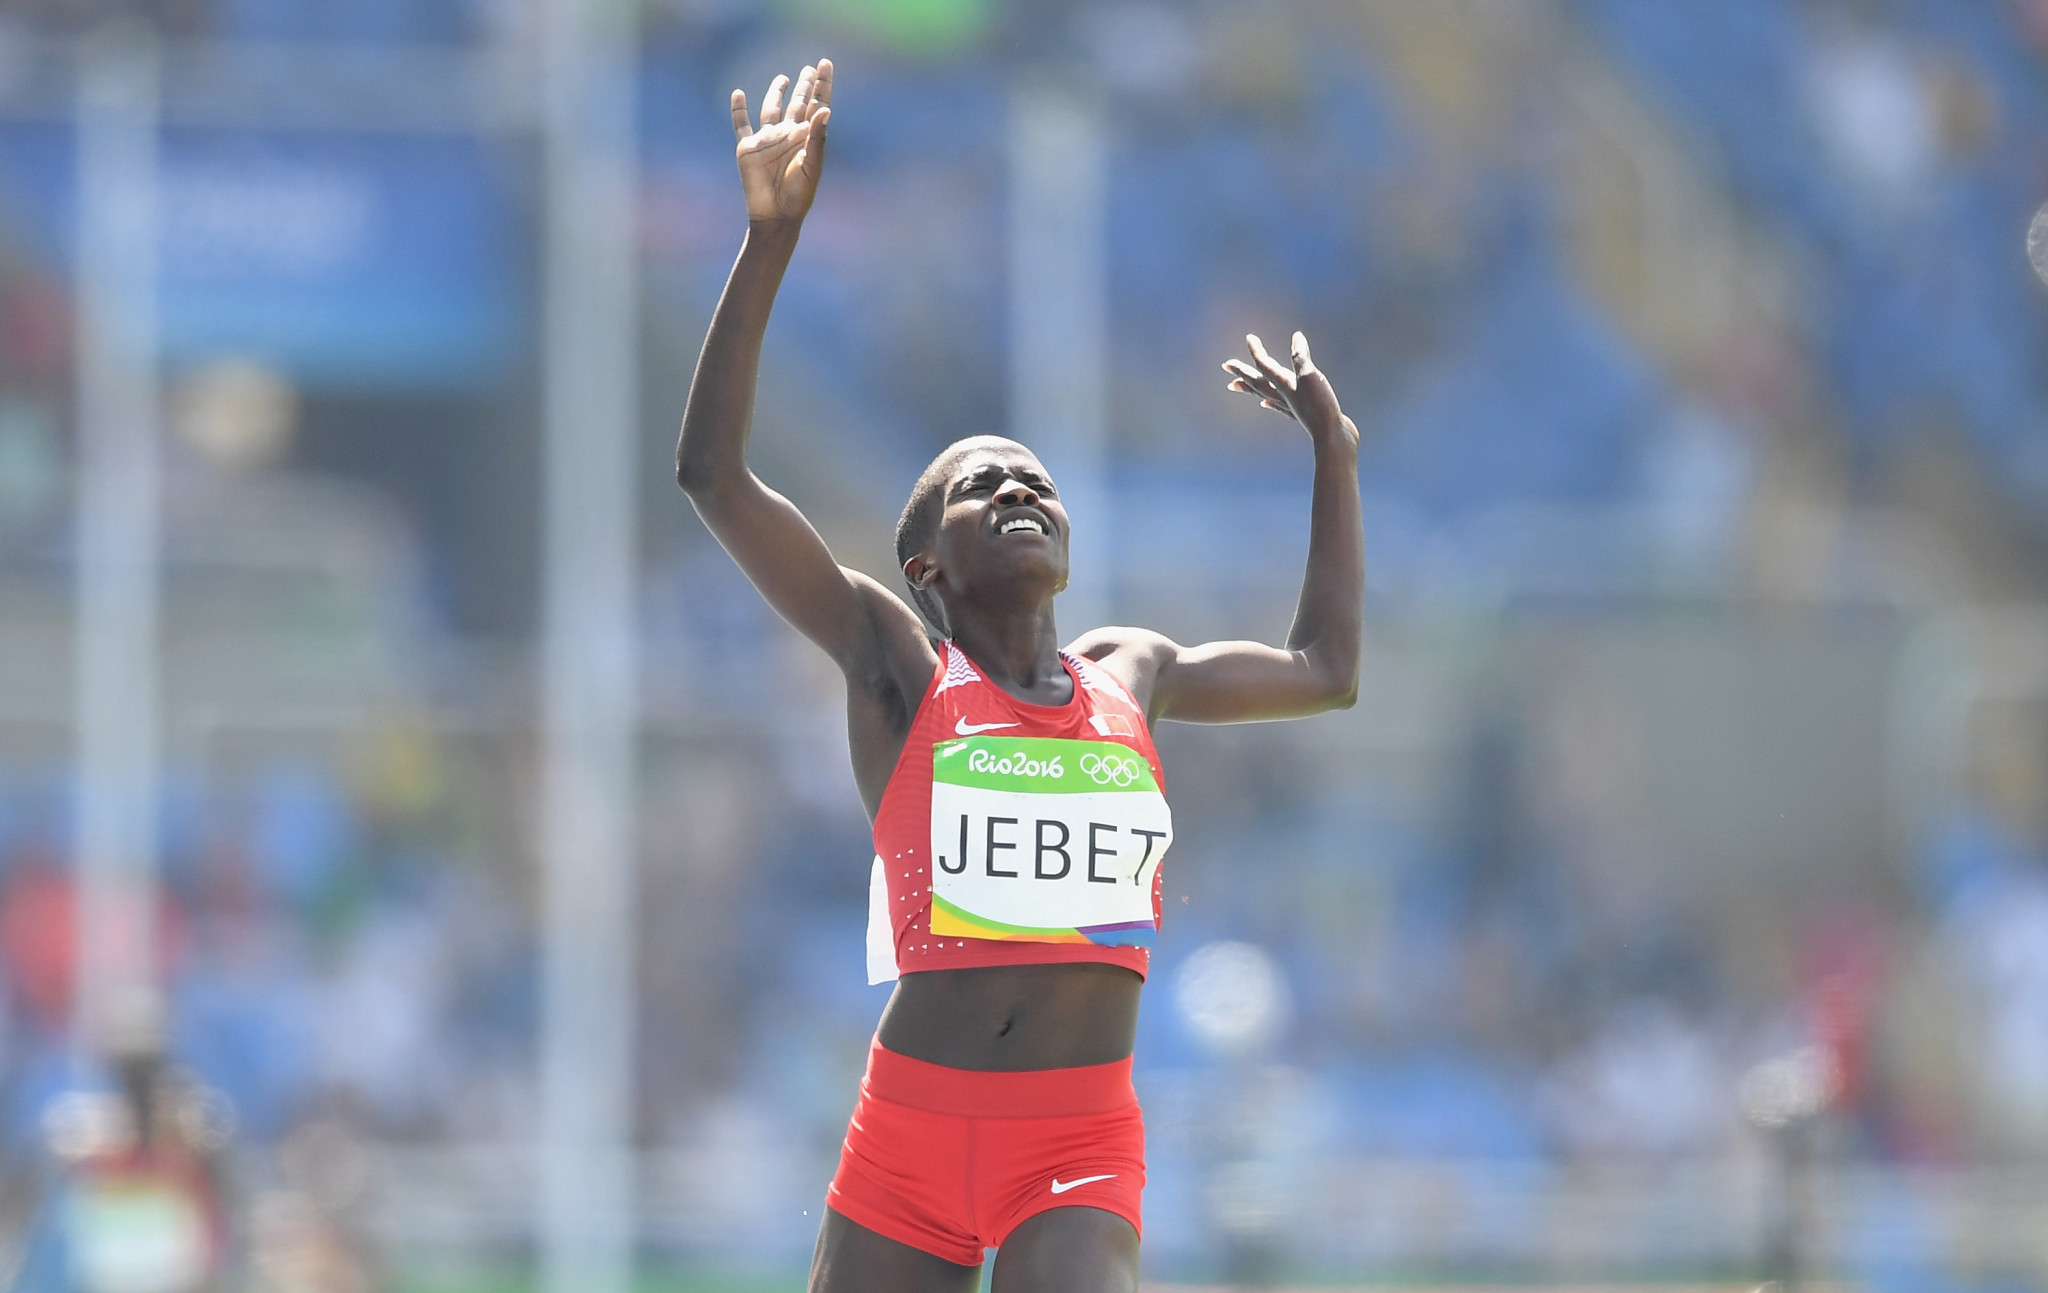 Ruth Jebet is the reigning Olympic steeplechase champion ©Getty Images